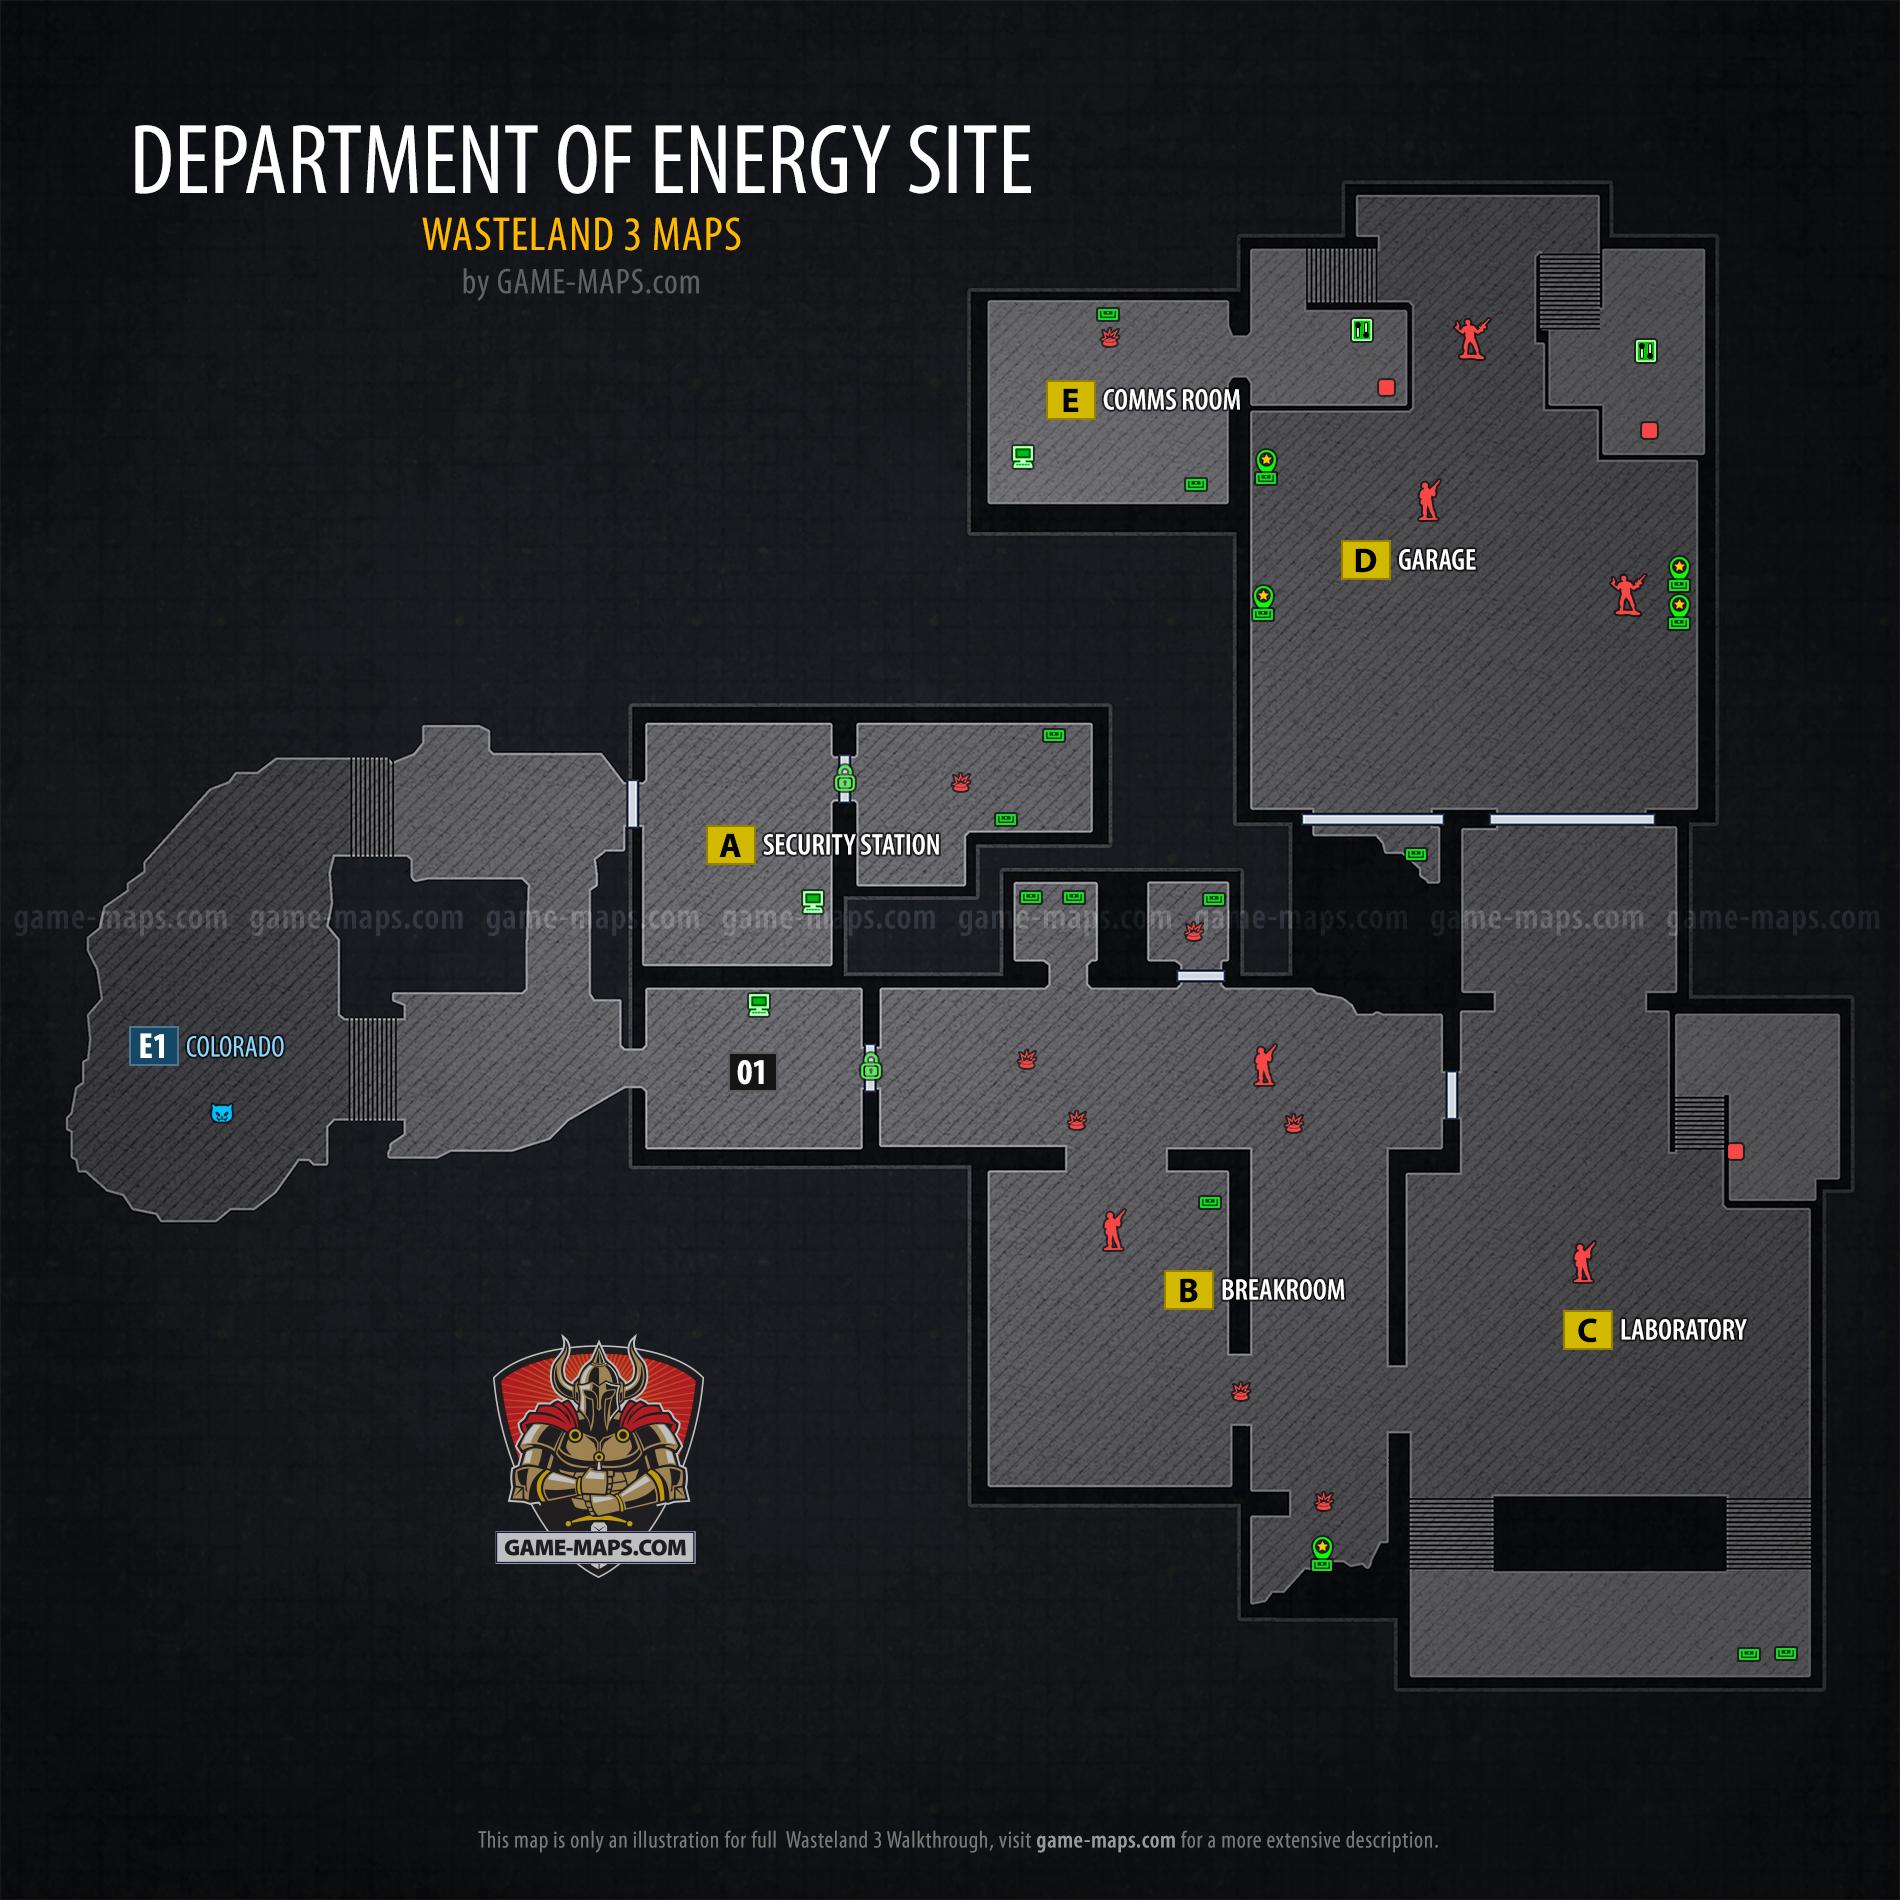 Department of Energy Site Map - Wasteland 3